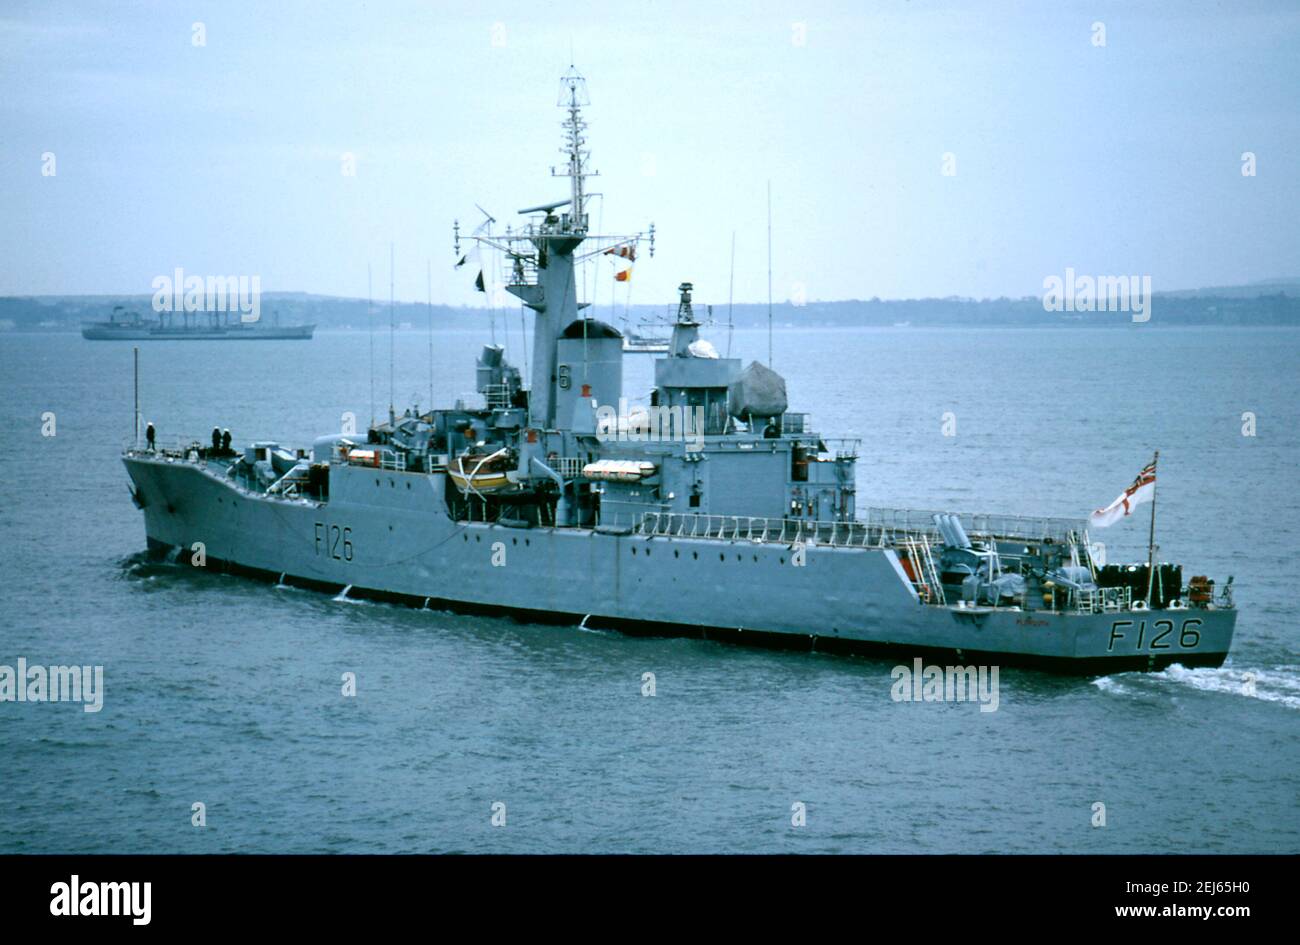 AJAXNETPHOTO. 1976. PORTSMOUTH, ENGLAND - FRIGATE HMS PLYMOUTH DEPARTS NAVAL BASE. ROTHESAY CLASS FRIGATE BUILT AT DEVONPORT DOCKYARD 1959. IN 1982, PLYMOUTH WAS ONE OF FIRST BRITISH WARSHIPS TO ARRIVE IN SOUTH ATLANTIC DURING THE FALKLANDS ISLANDS CONFLICT, TAKING PART IN RECAPTURE OF SOUTH GEORGIA DURING OPERATION PARAQUET.  PHOTO:JONATHAN EASTLAND/AJAX REF:602659 Stock Photo